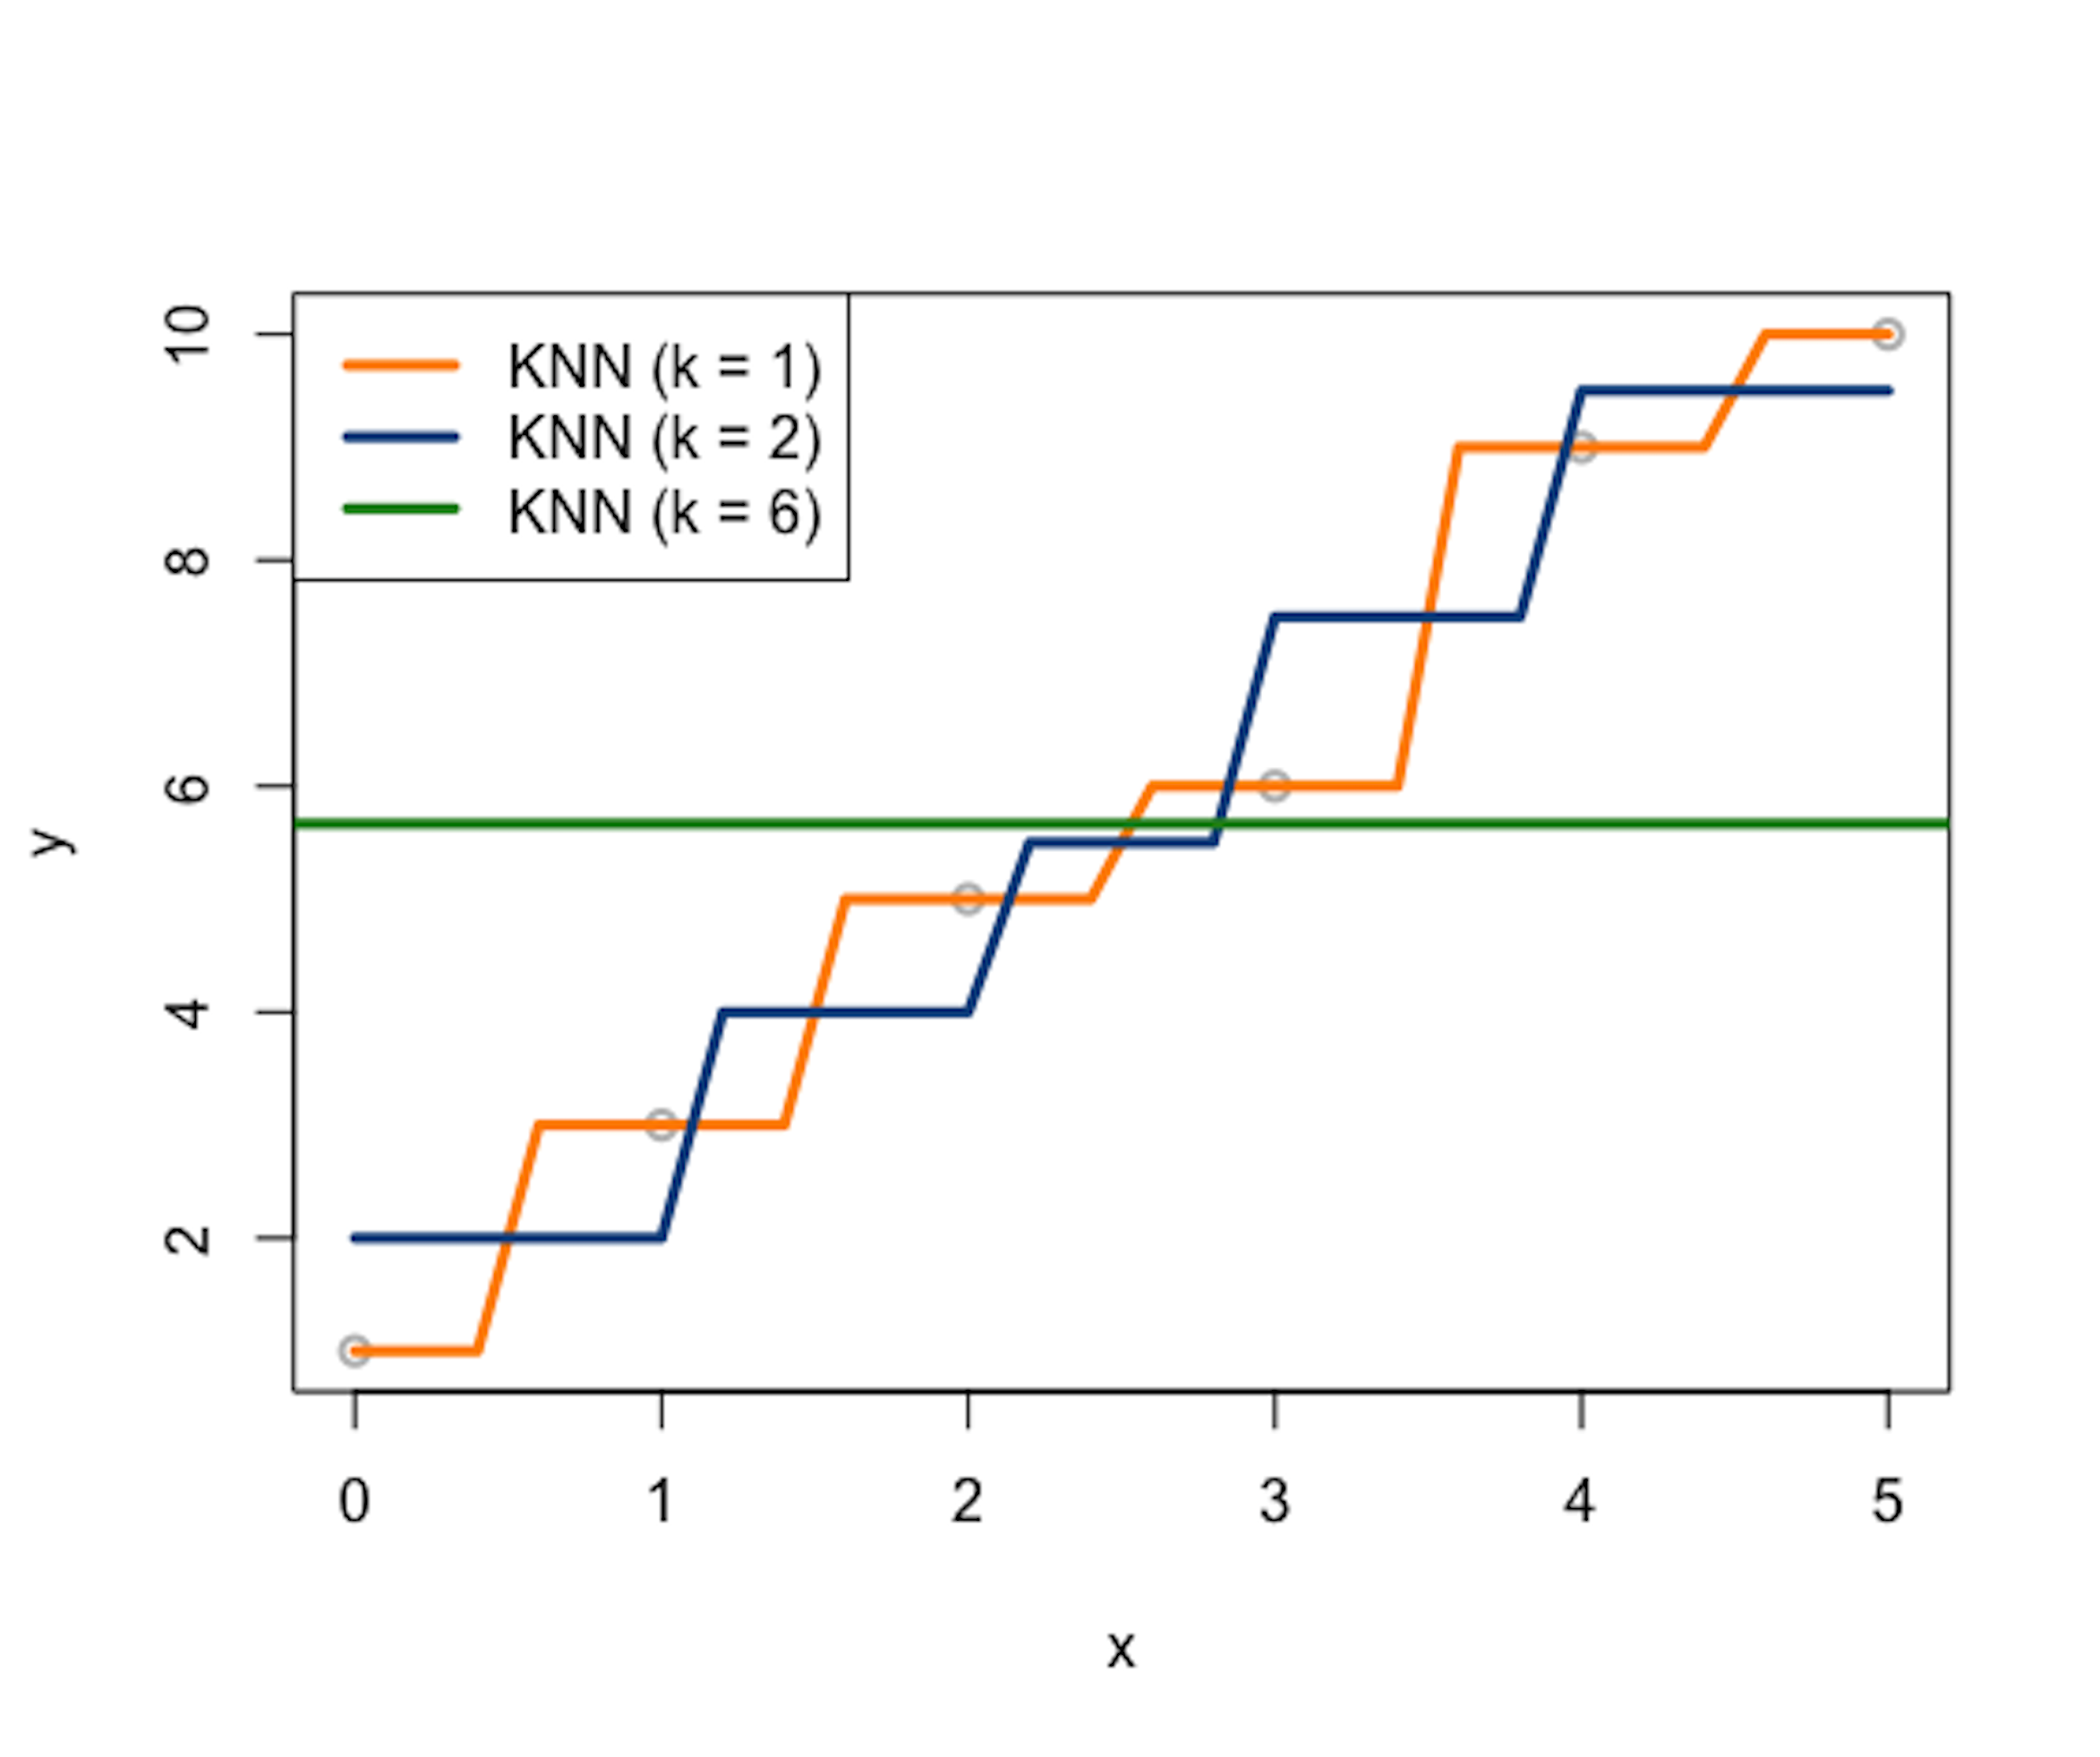 Three KNN smoother models ($k=1$, $k=2$, and $k=6$)